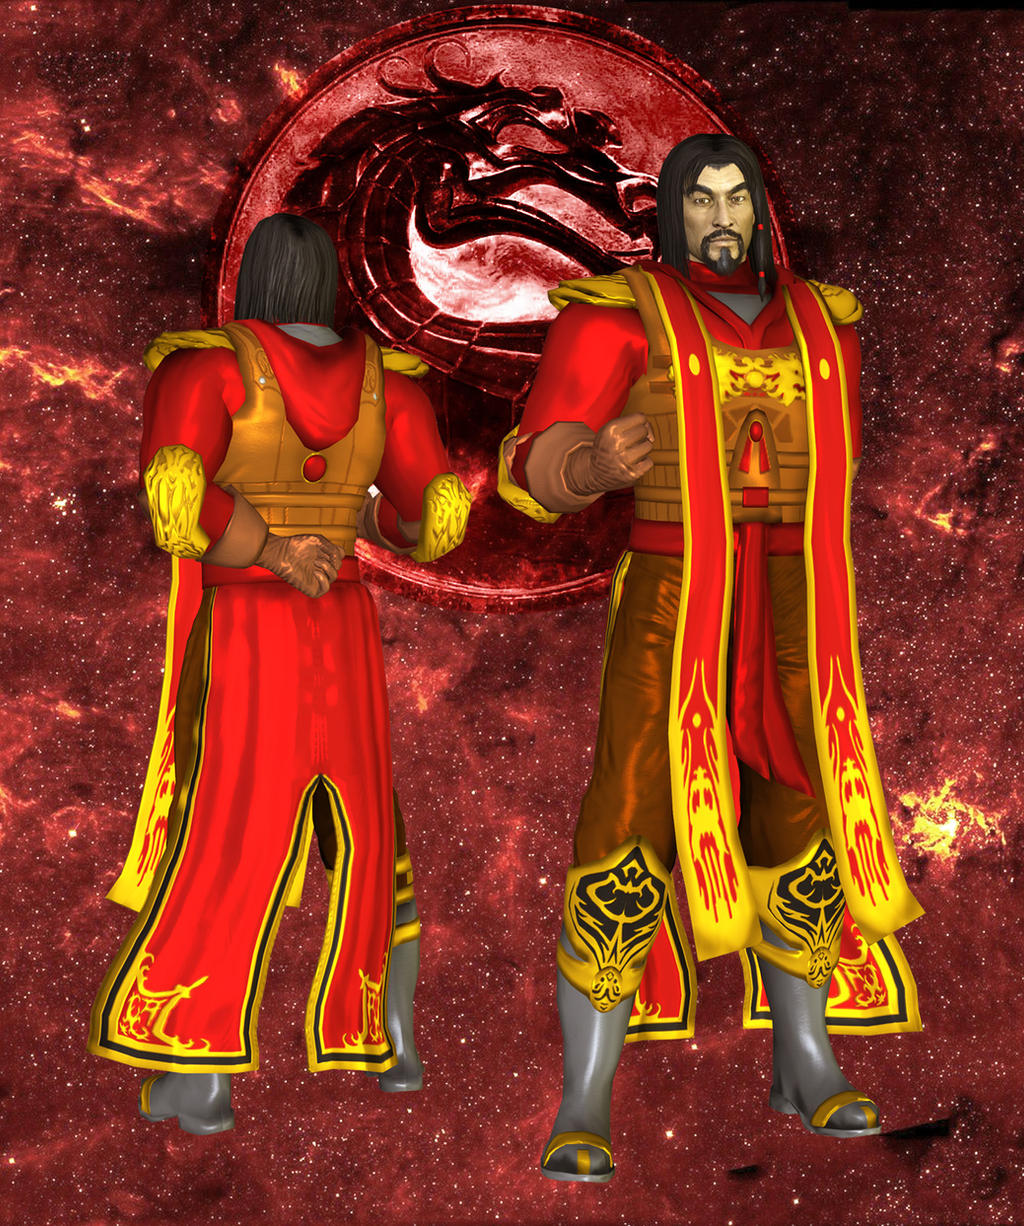 MK Deadly Alliance - Shang Tsung [XPS] by 972oTeV on DeviantArt